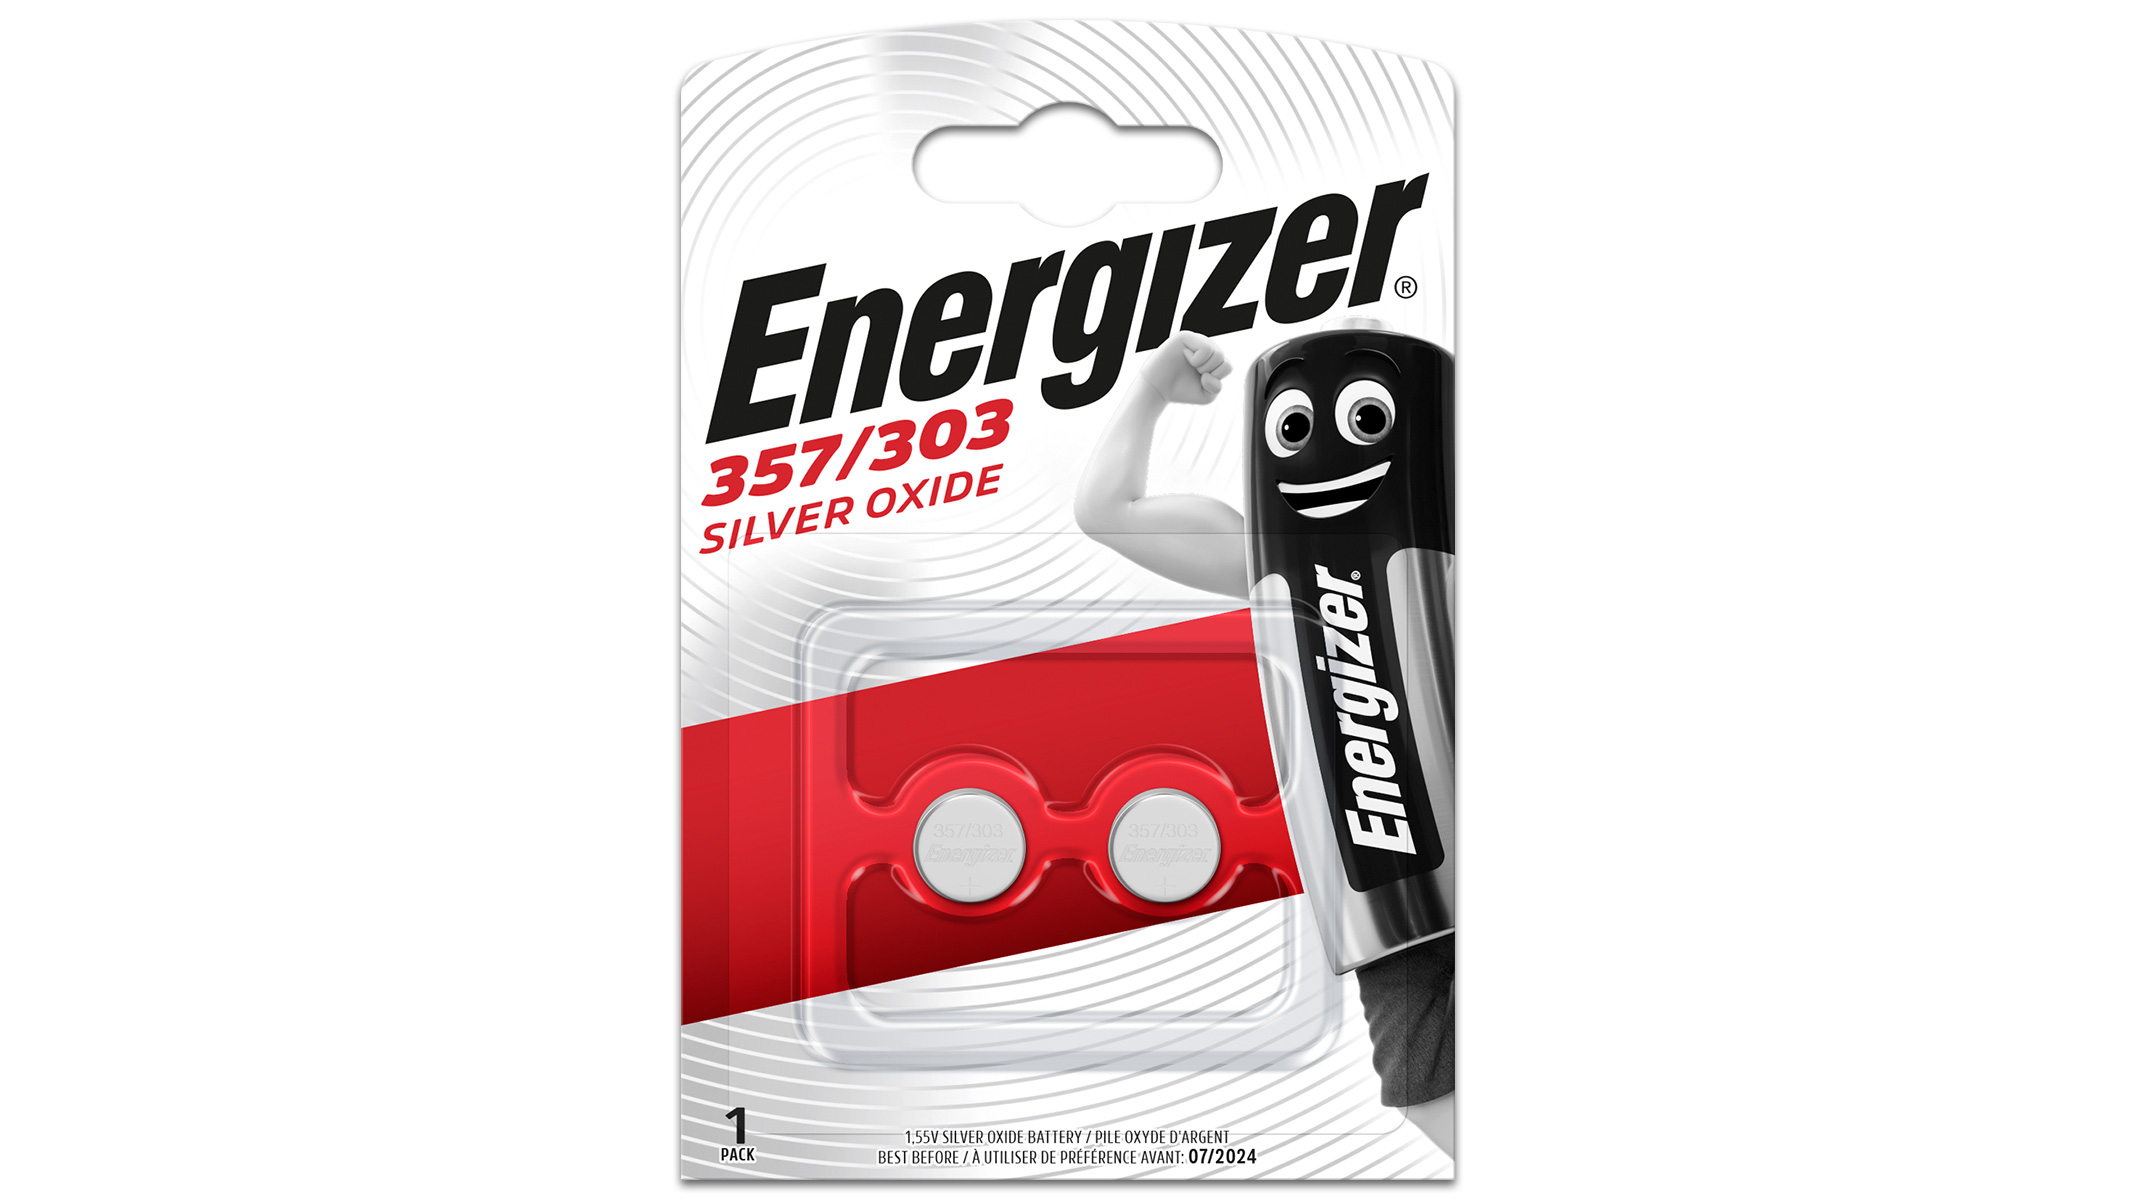 2 Batteries Energizer EPX76 in a blister (SR44/357/303)